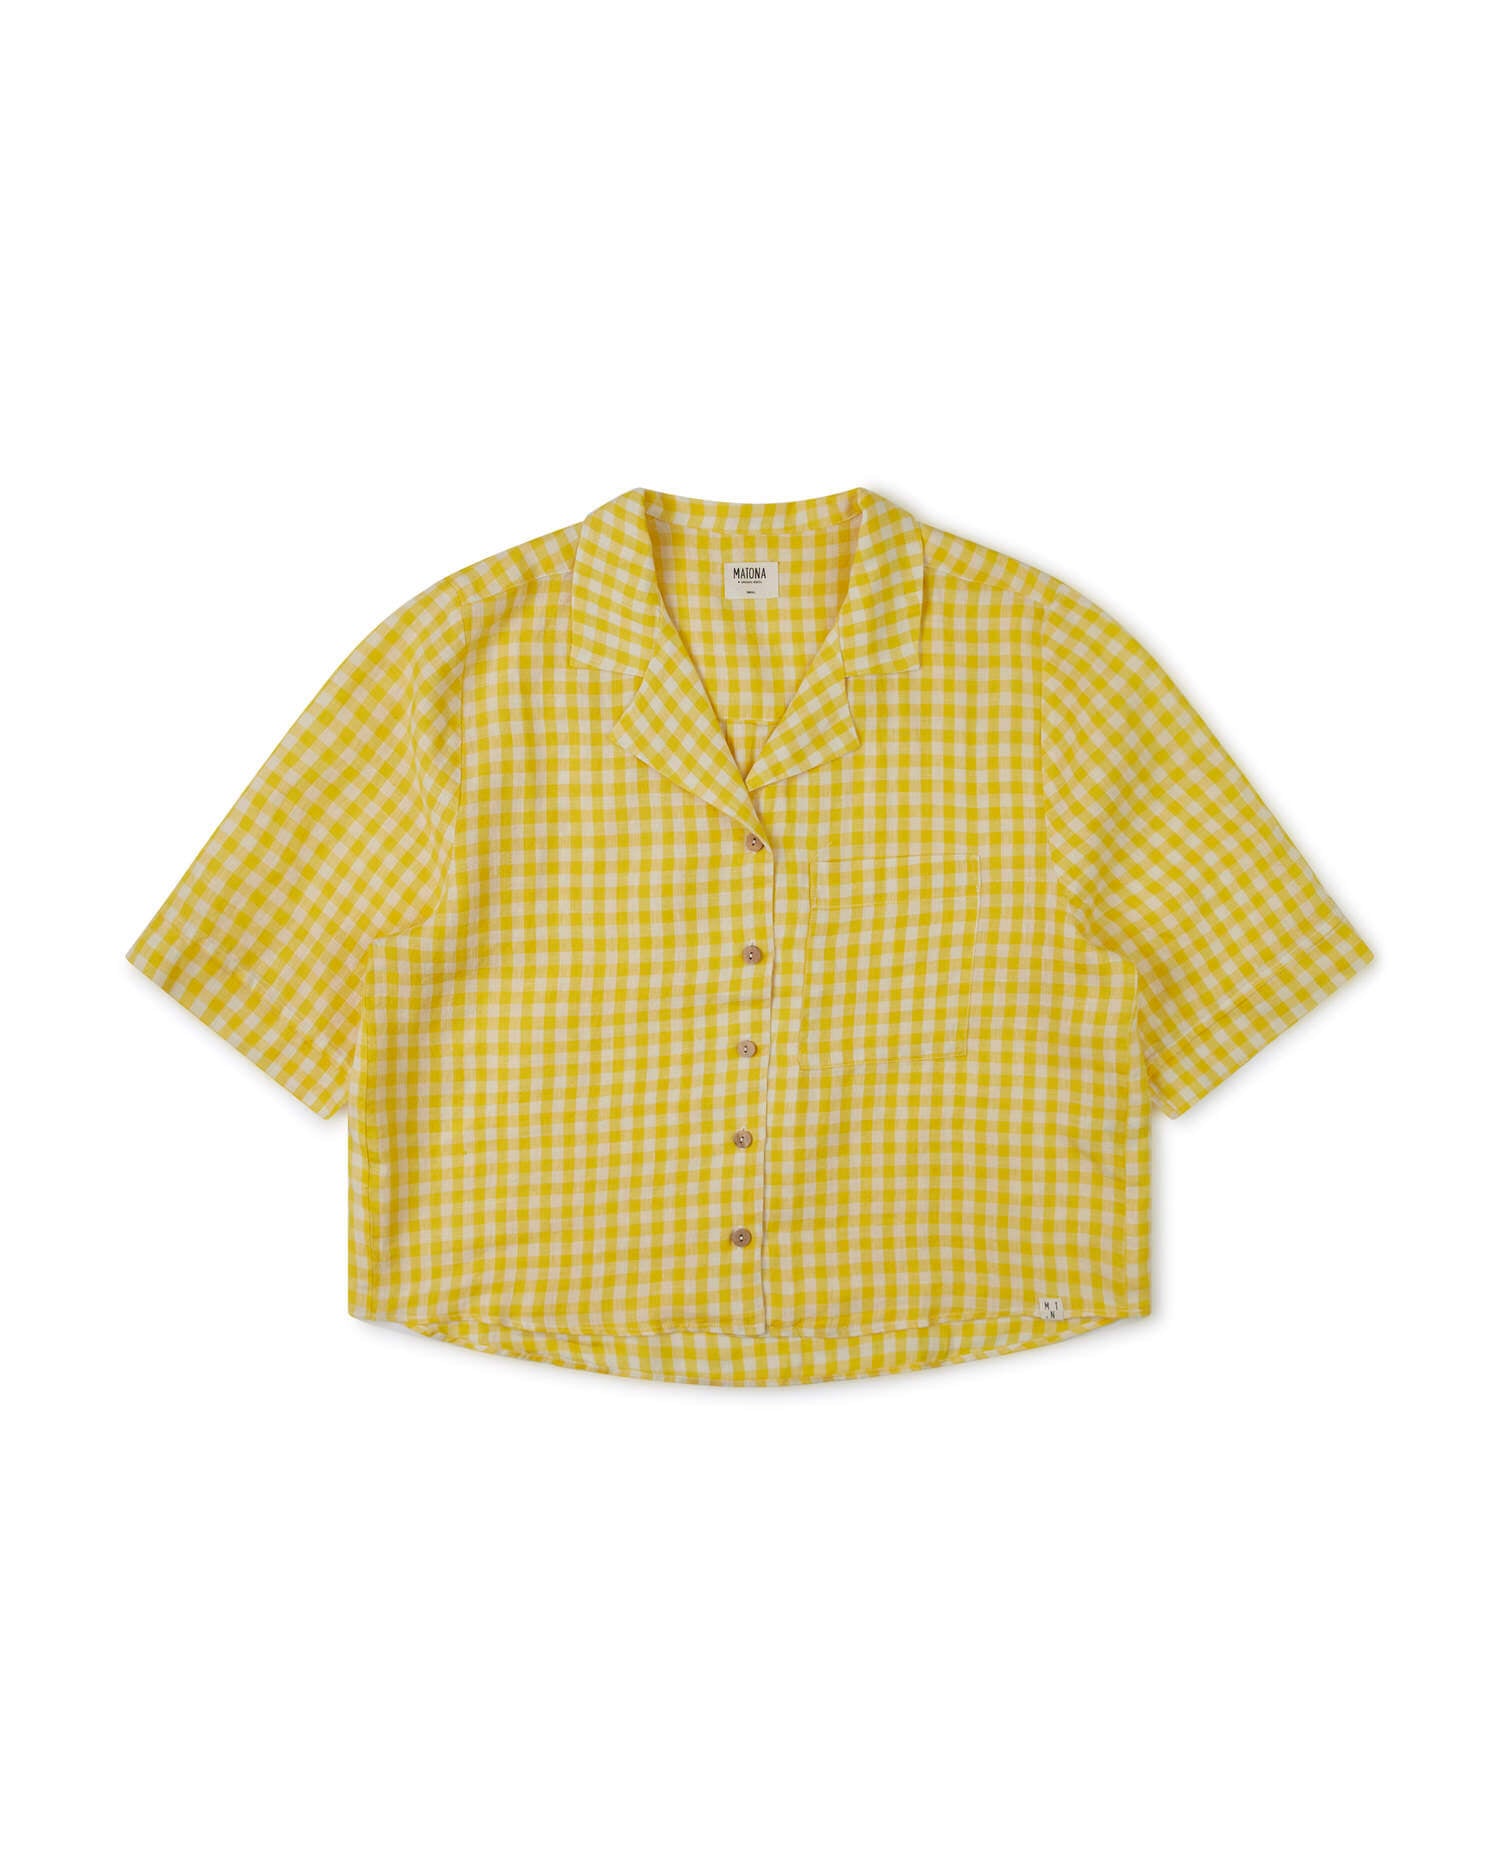 Collared Blouse yellow gingham